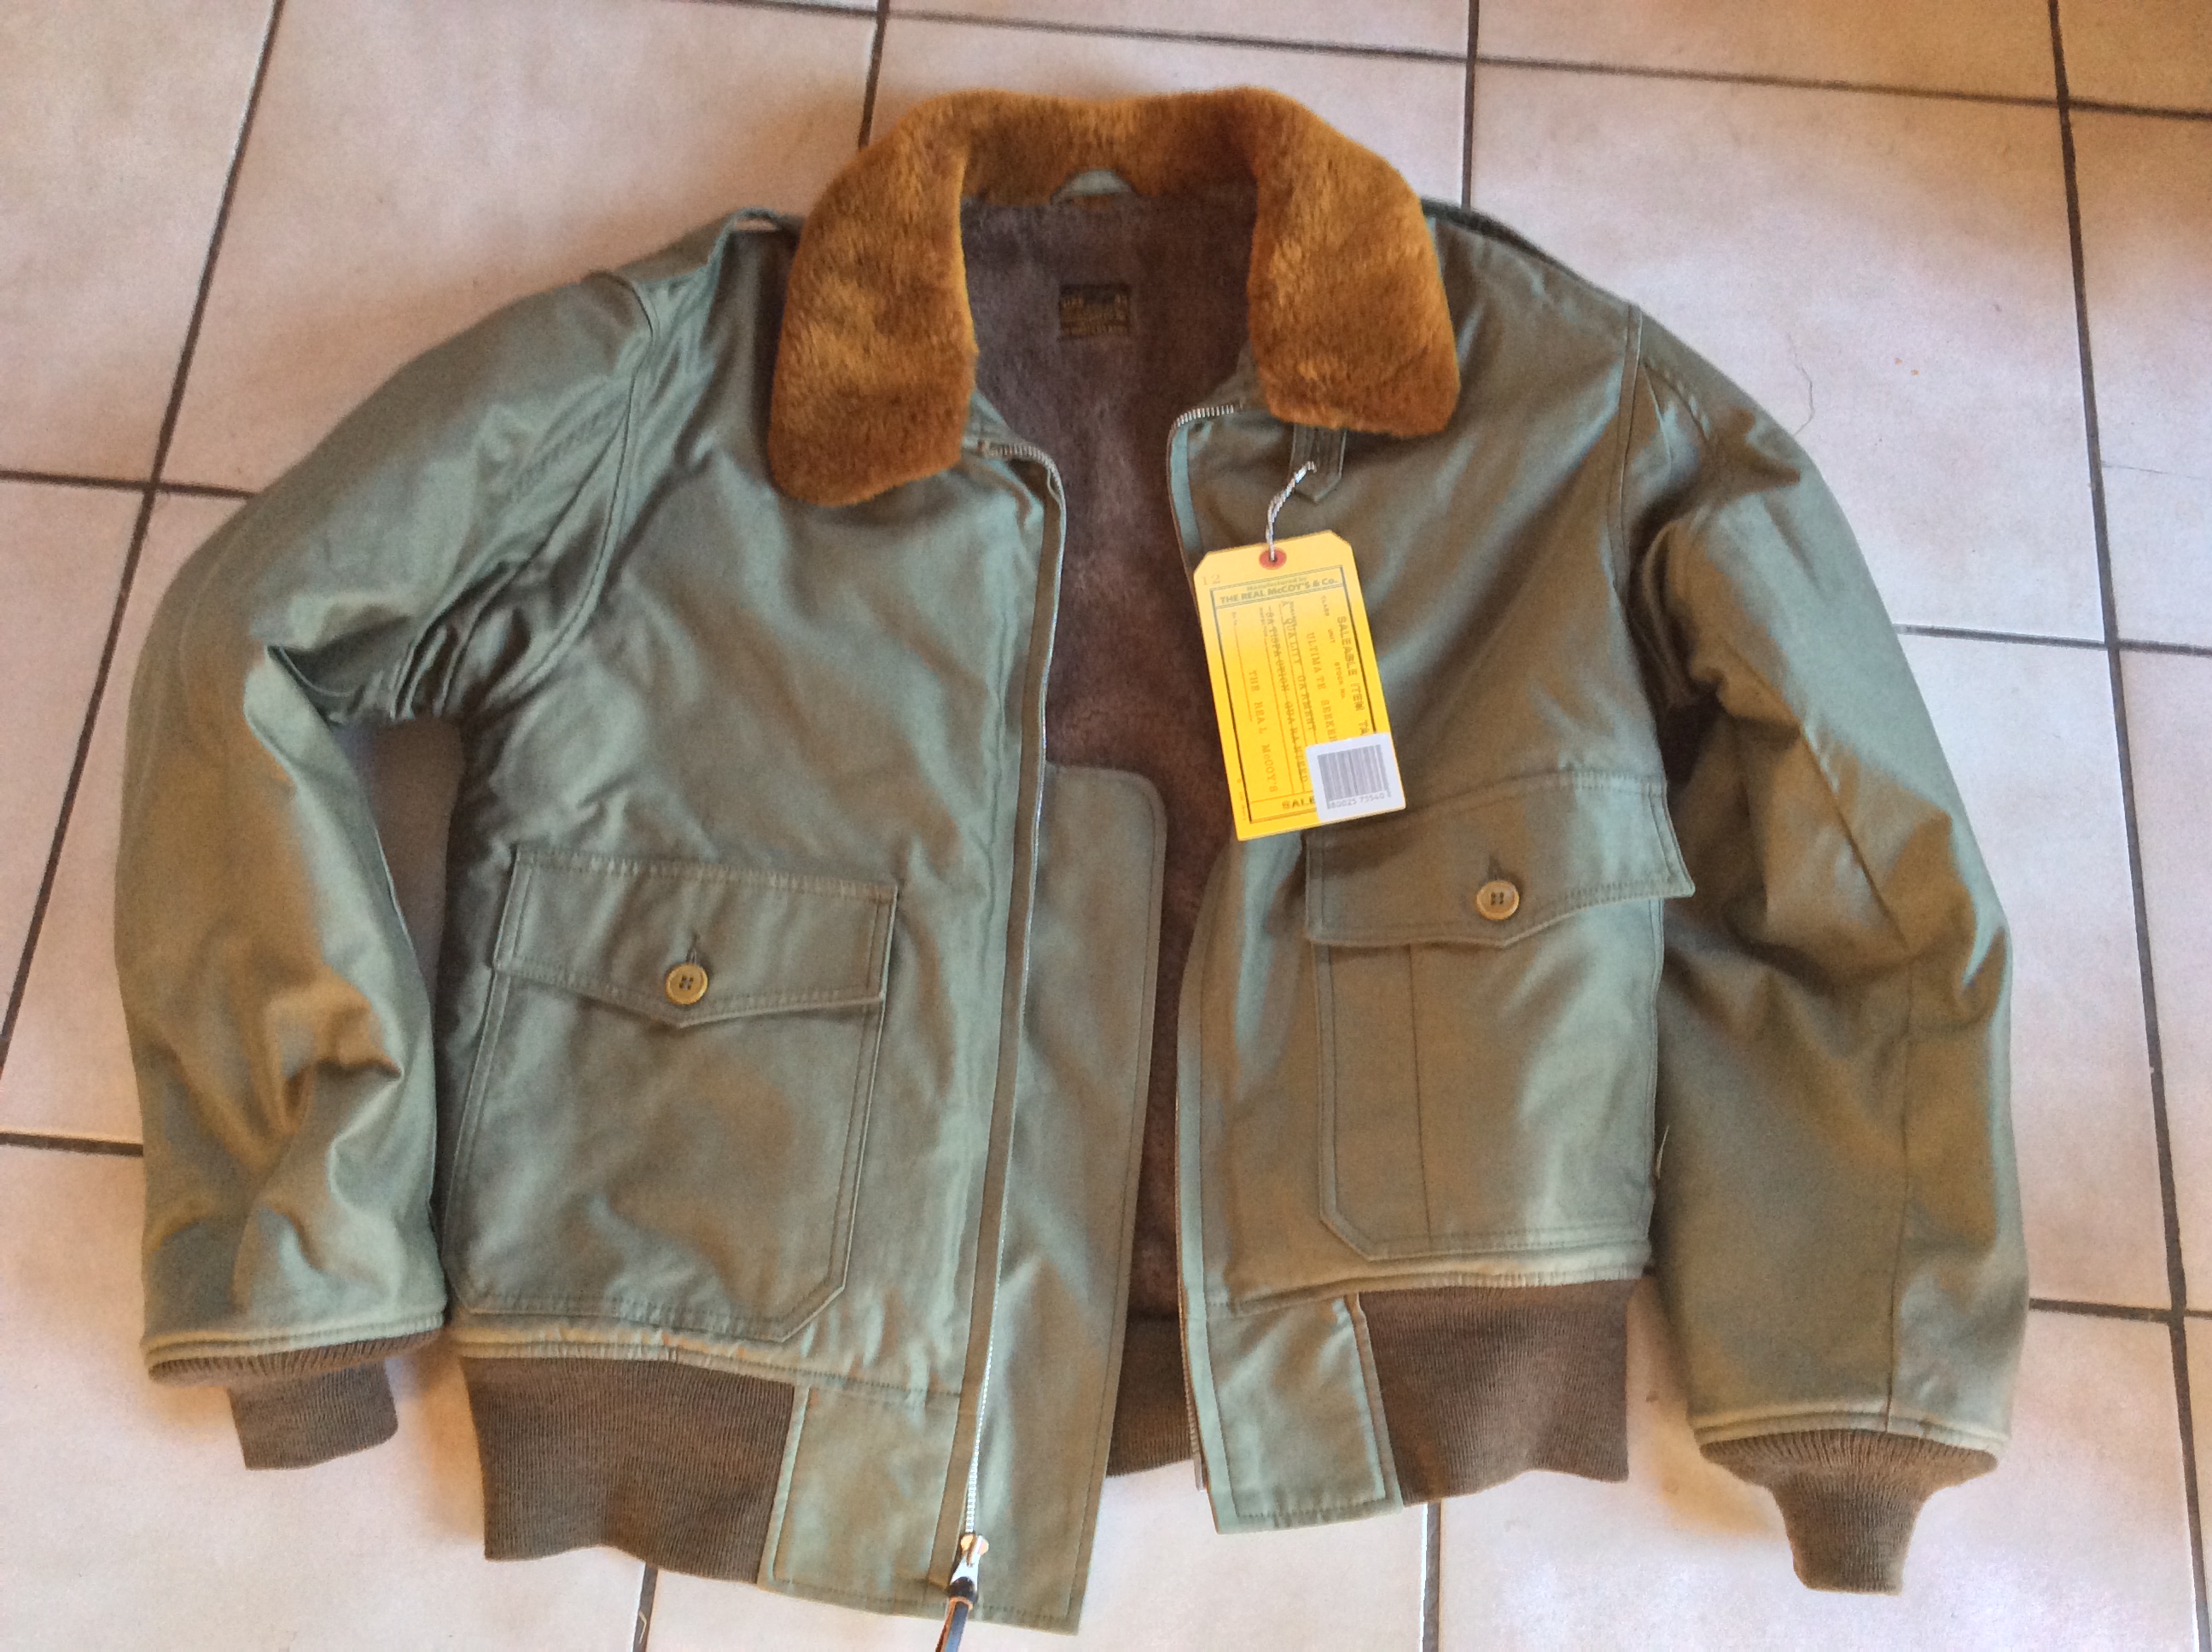 Stagg Coat B-10 from RMCJ | Vintage Leather Jackets Forum